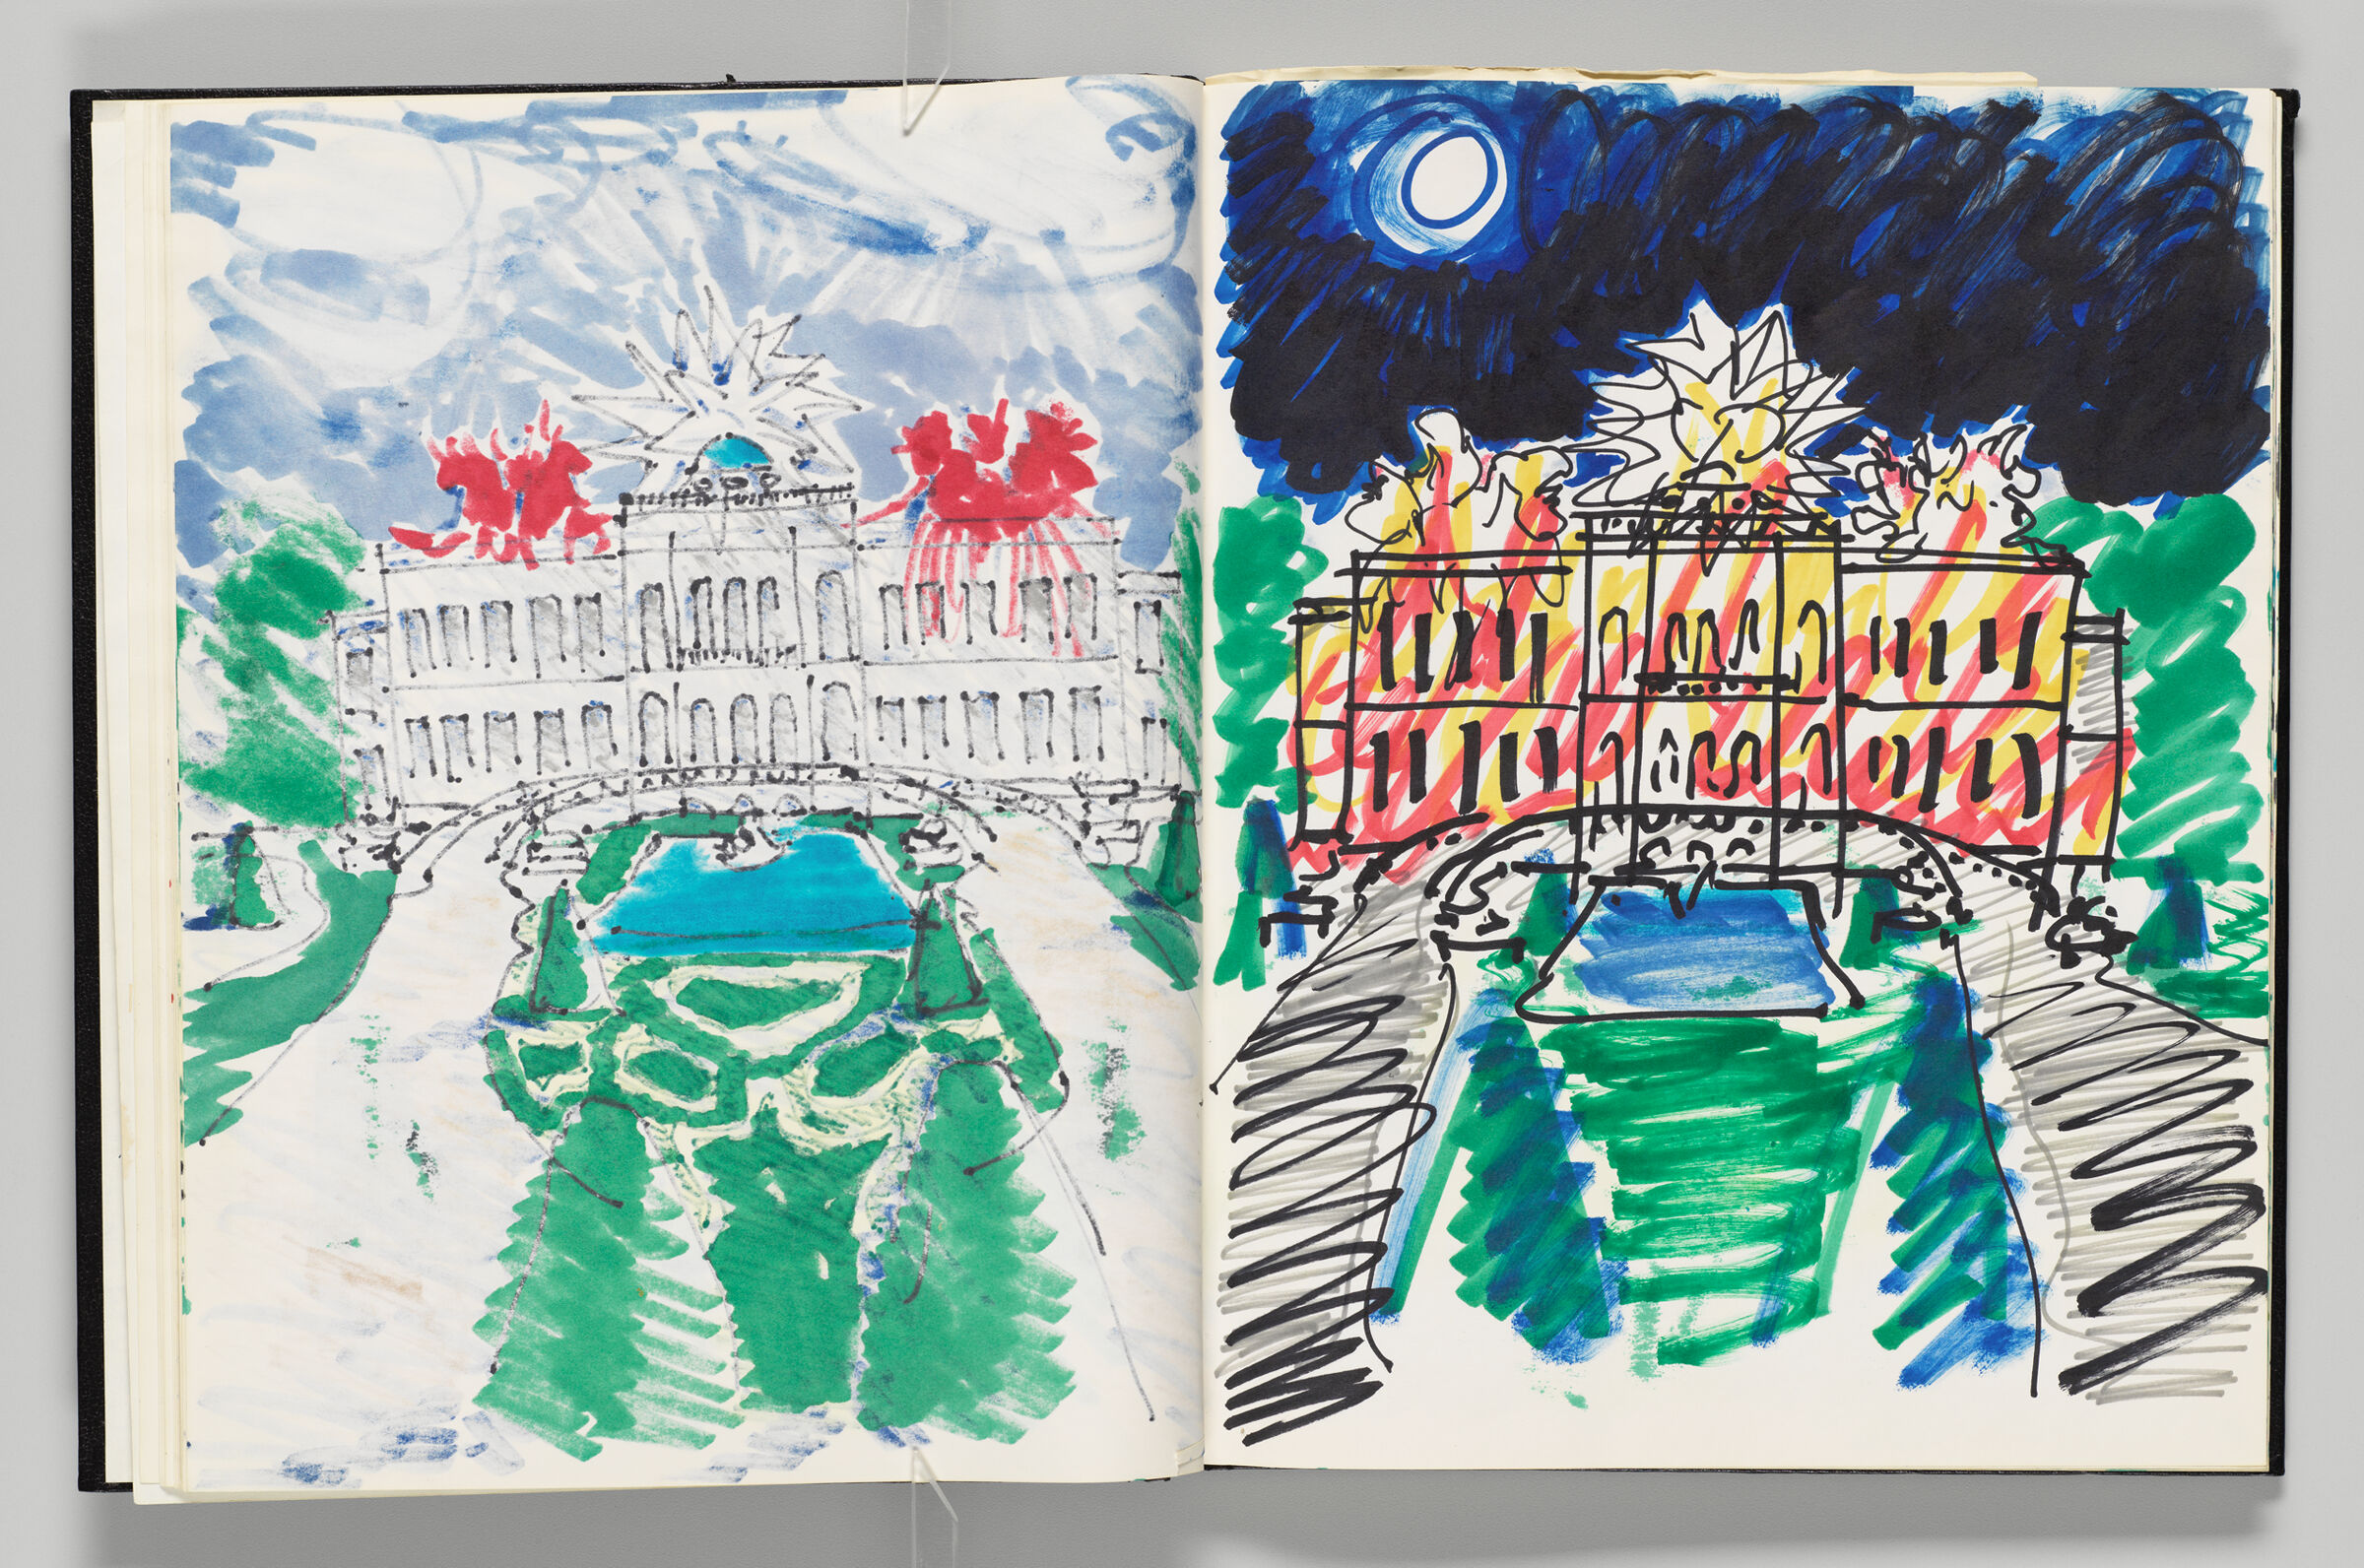 Untitled (Bleed-Through Of Previous Page, Left Page); Untitled (Schloss Klessheim Under Moonlight, Right Page)